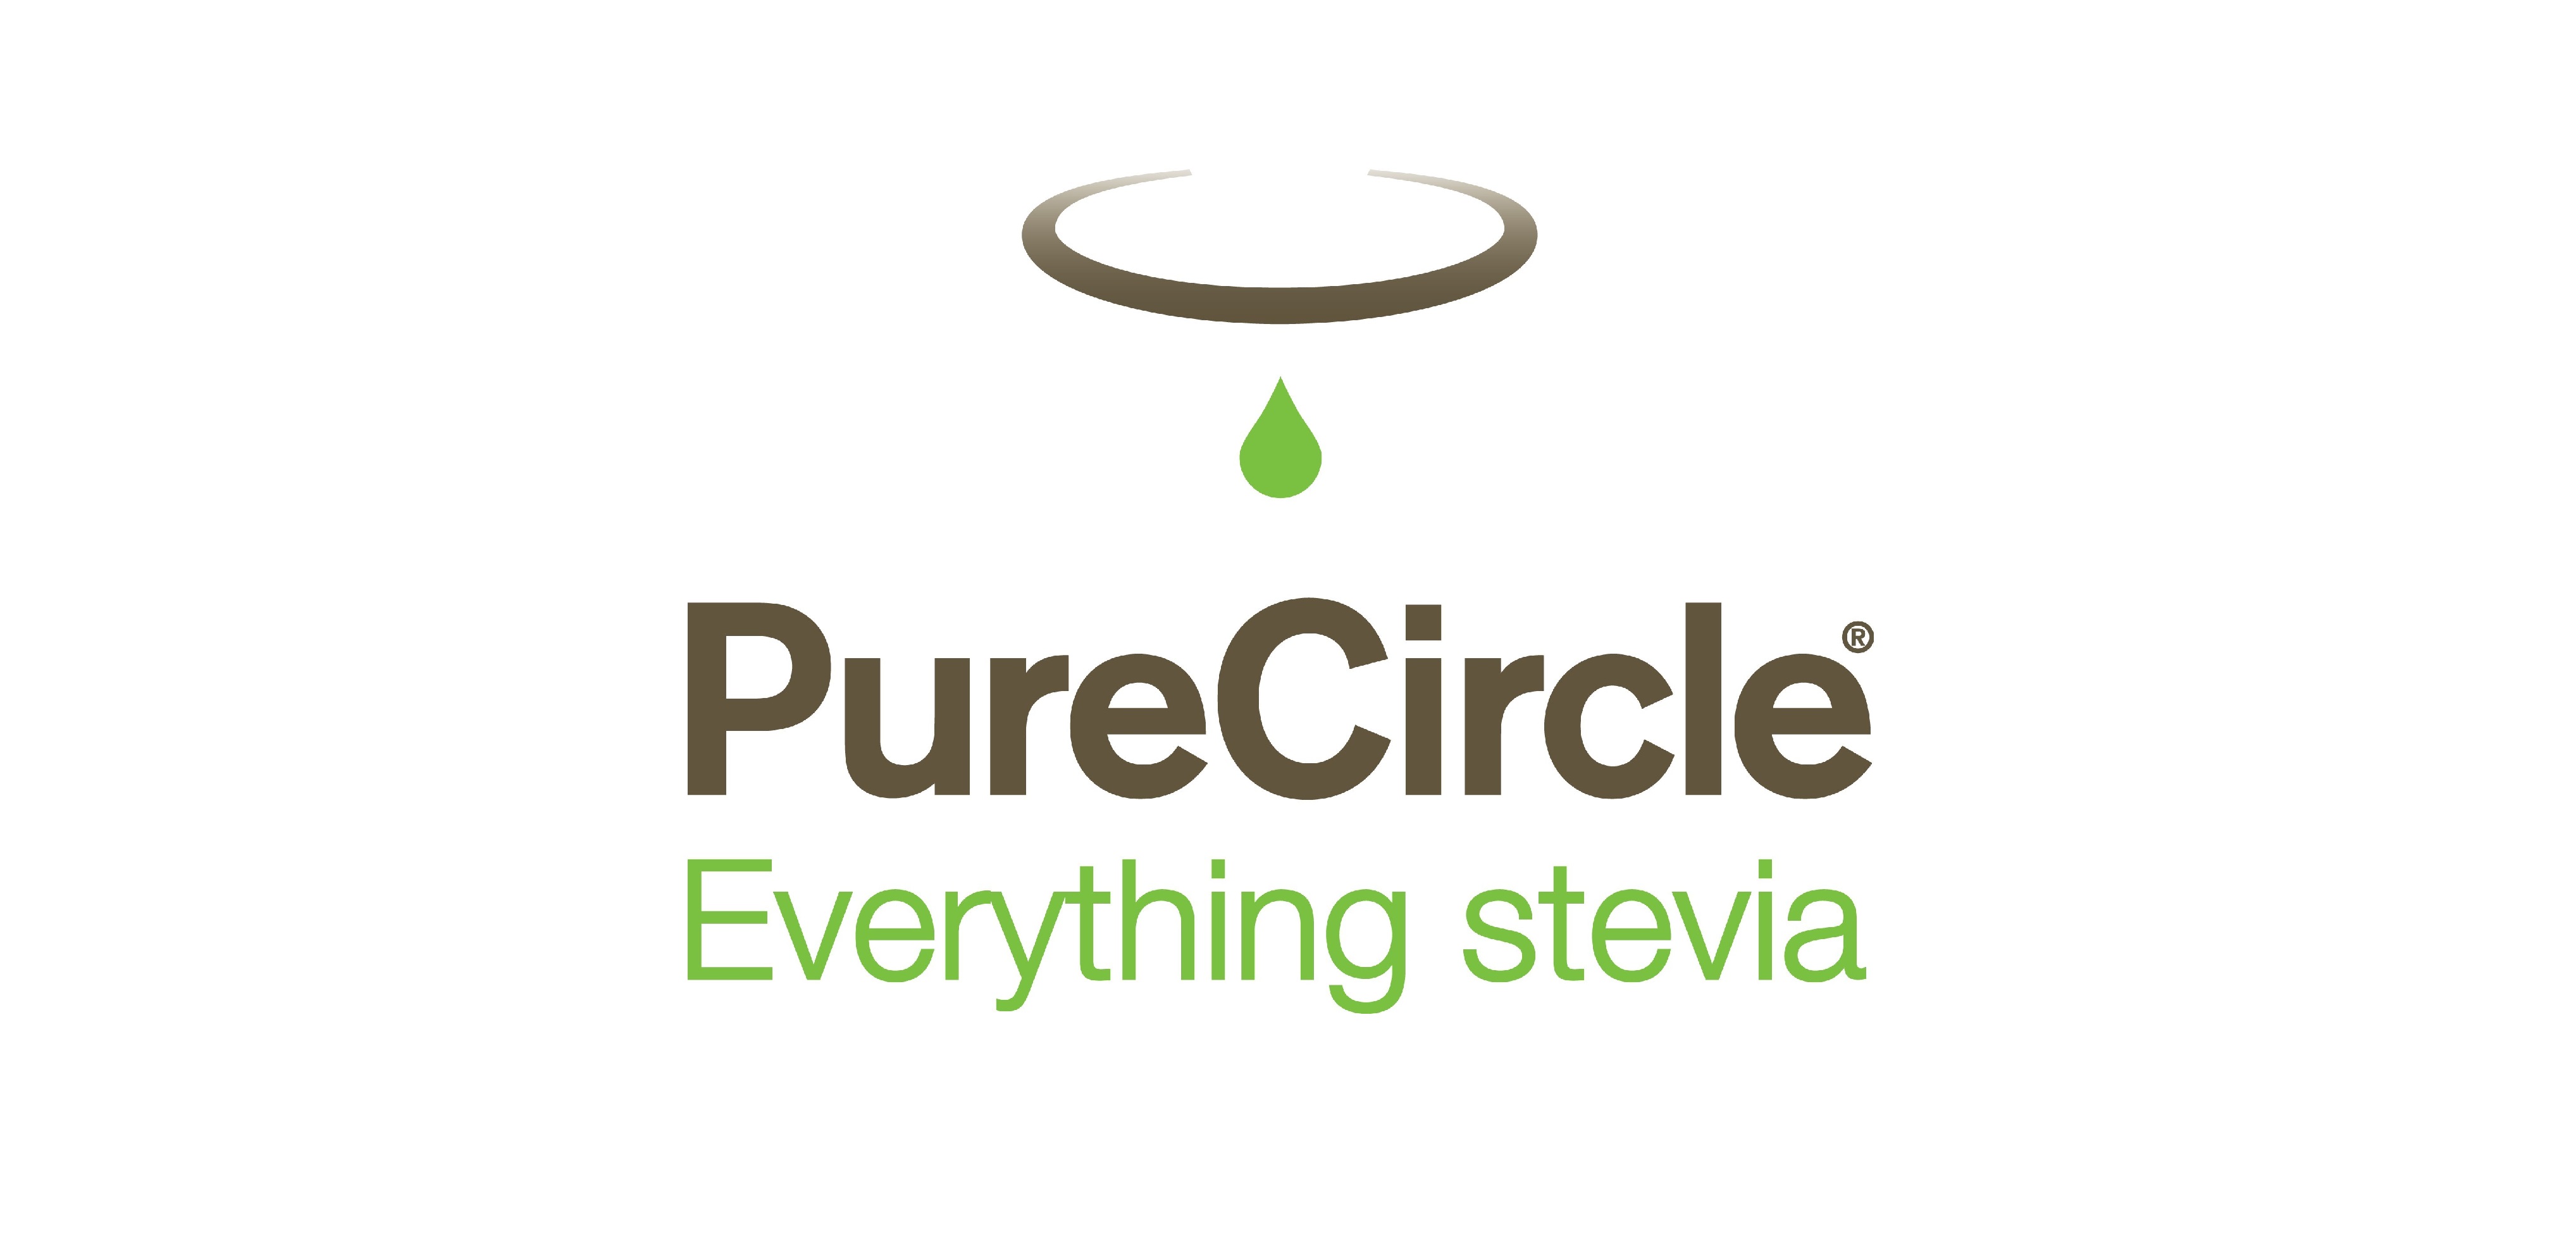 PureCircle Announces First Stevia Antioxidant Product for Beverages